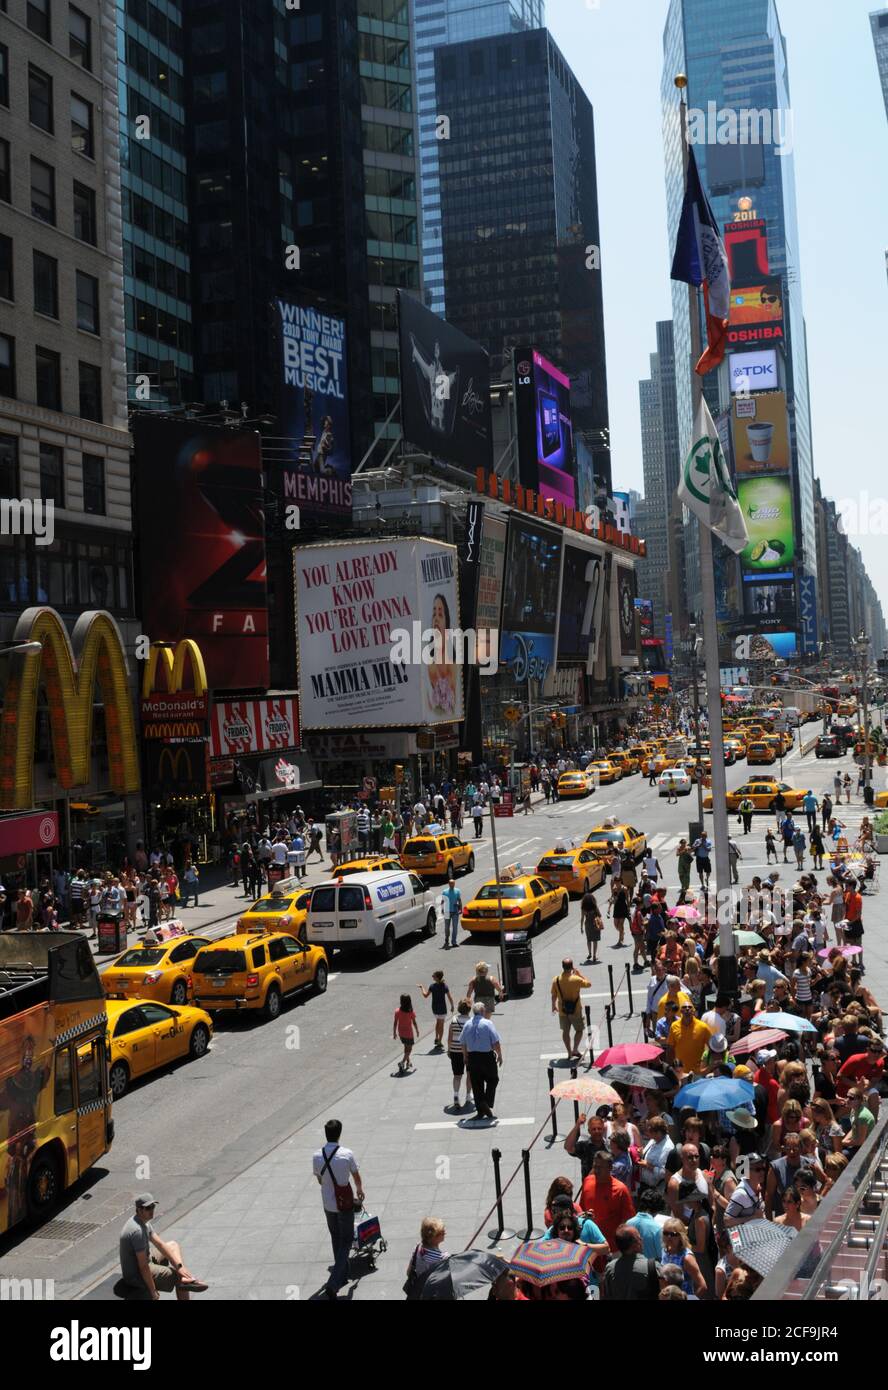 Crowd of people walking on the New York City Times Square, New York, USA Stock Photo